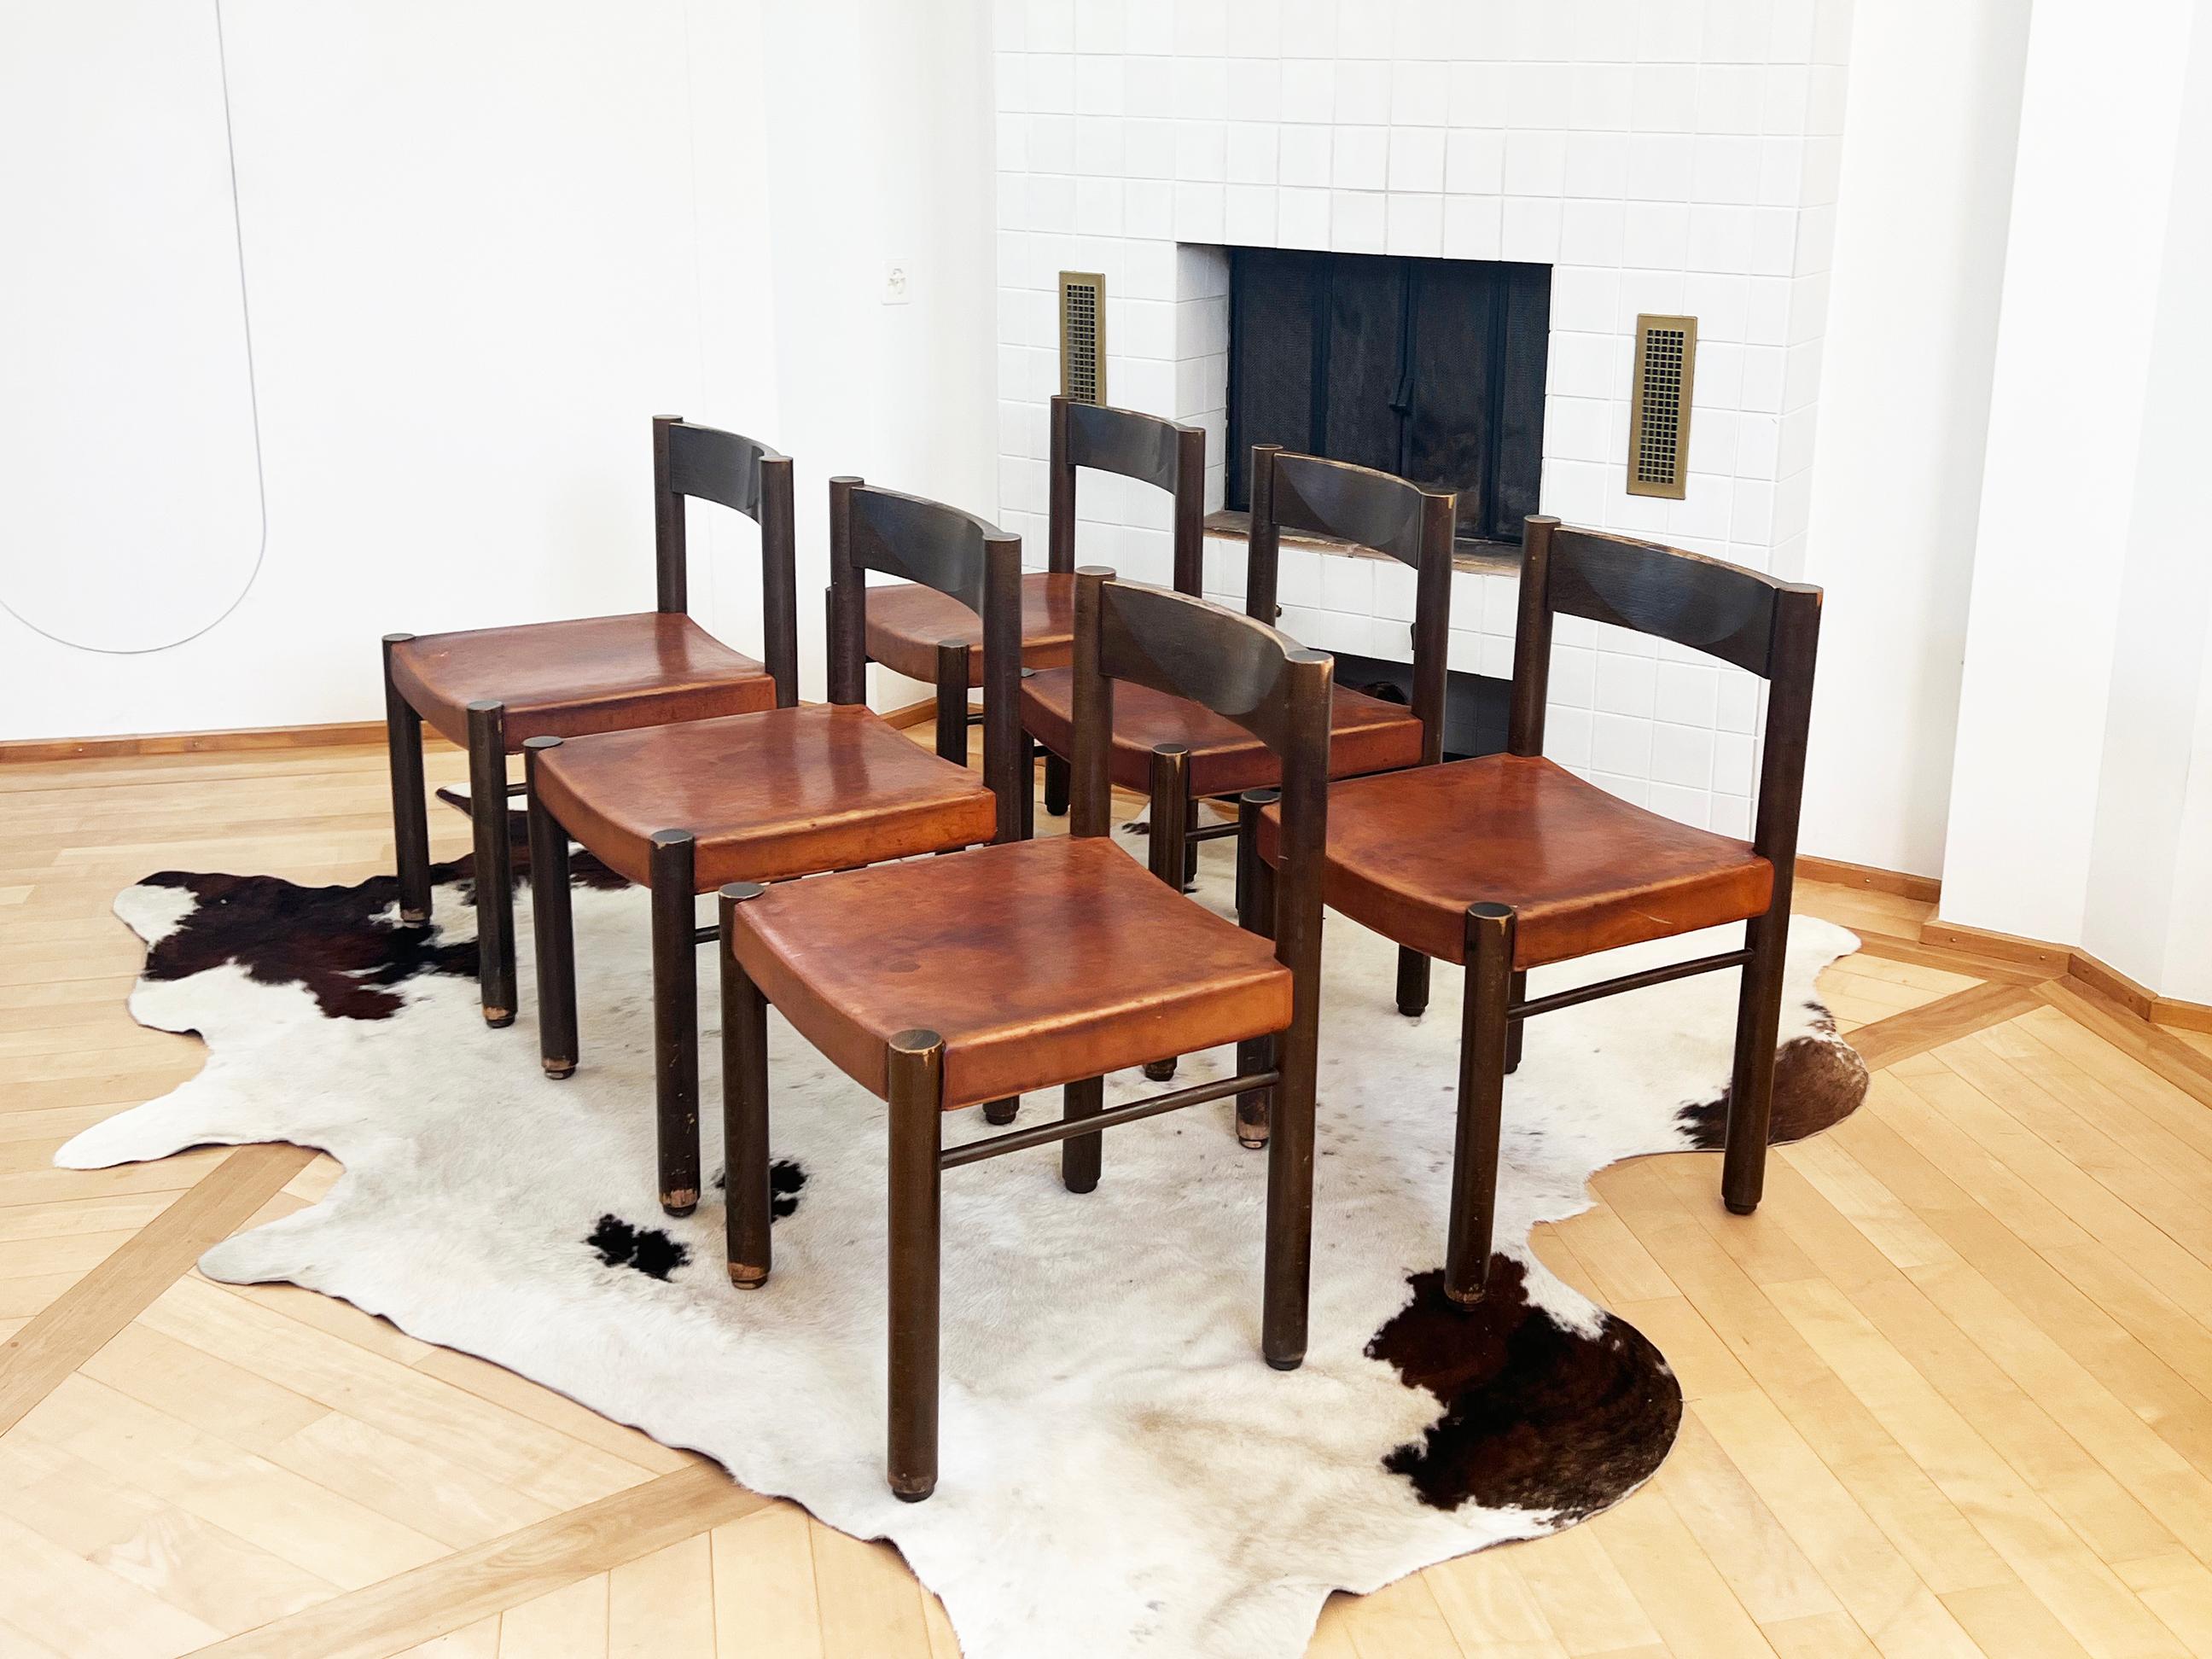 Set of six 1960s ICONIC and rare tiger oak wood and saddle leather seat chairs model 6200 by Robert and Trix Haussmann from Zurich Switzerland. In very good used condition, well worn in patina leather

Ergonomic and very comfortable designer